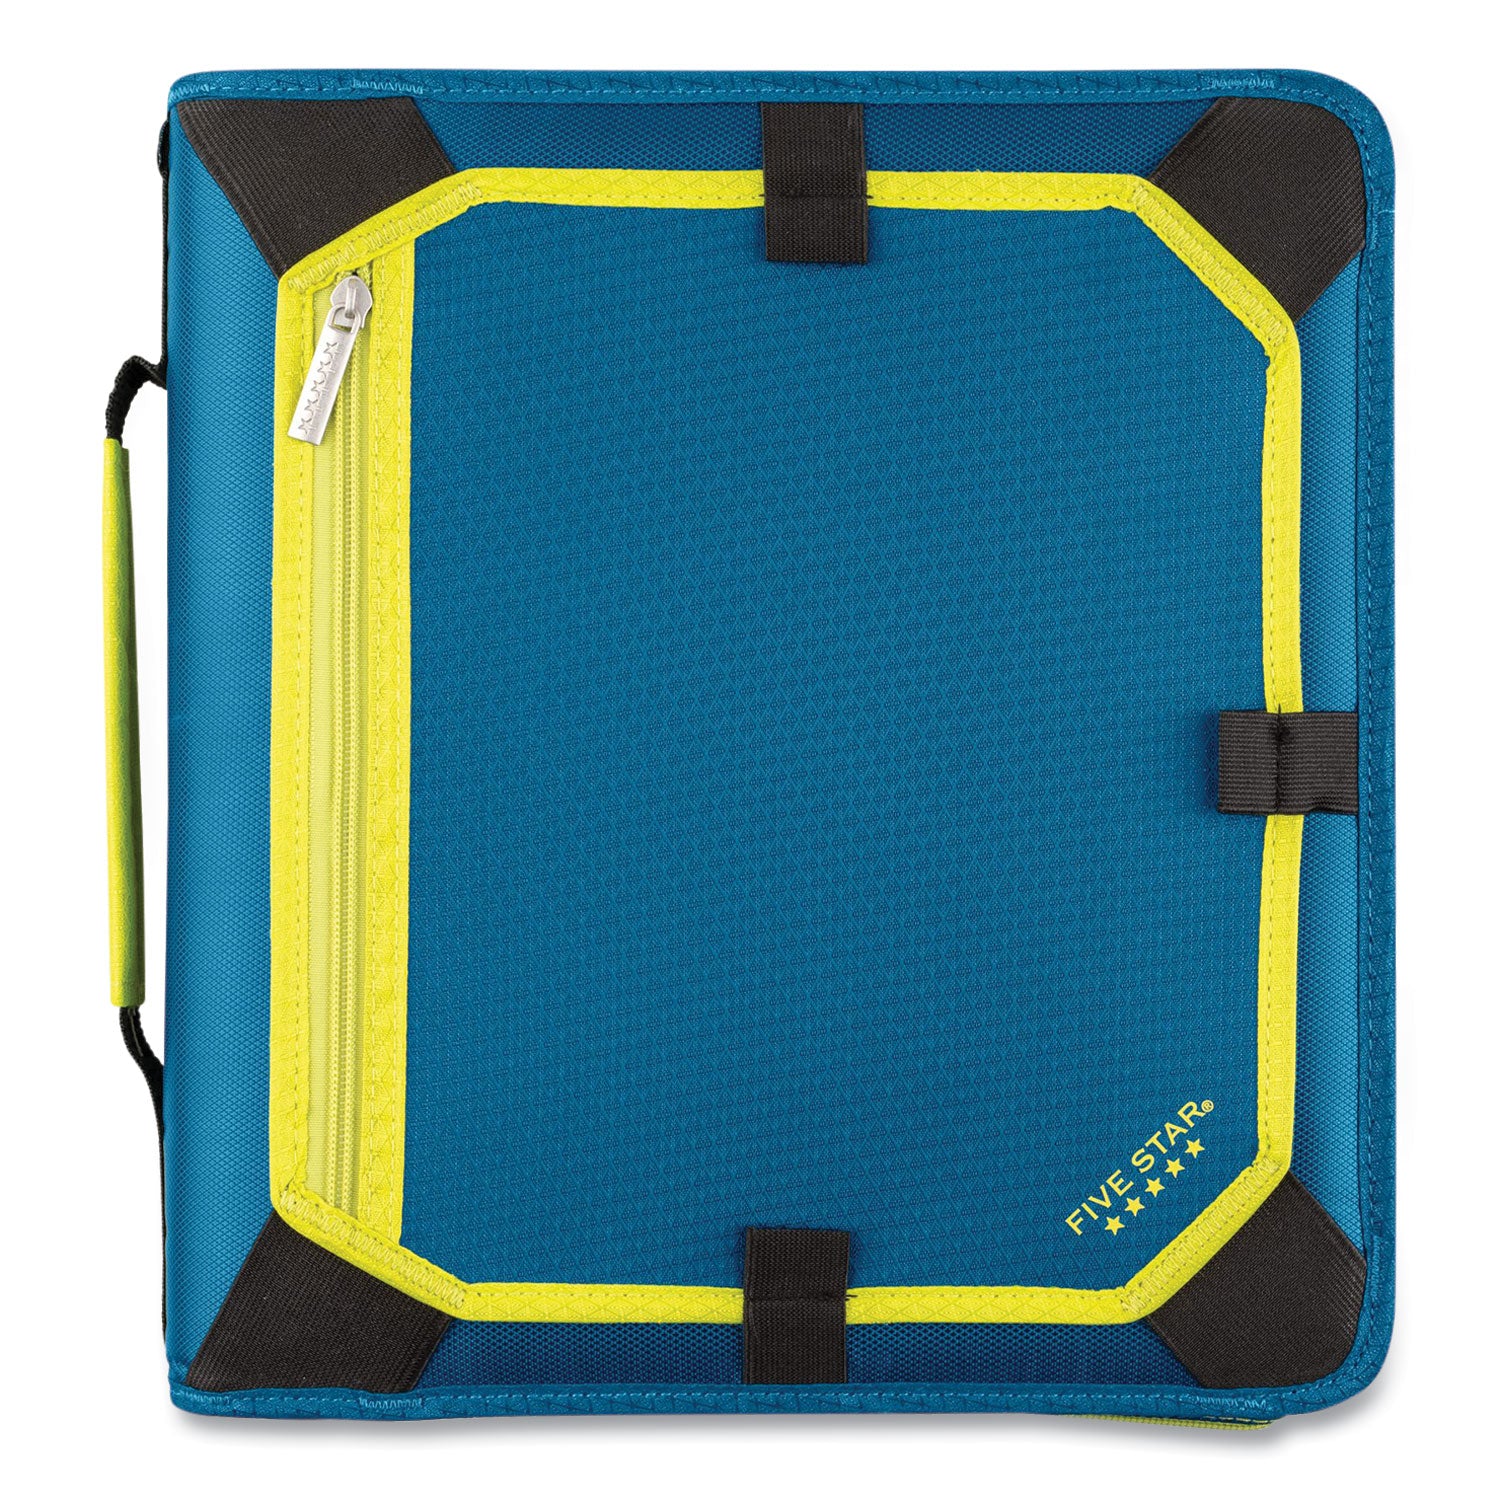 zipper-binder-3-rings-2-capacity-11-x-85-teal-yellow-accents_acc29052ih8 - 1